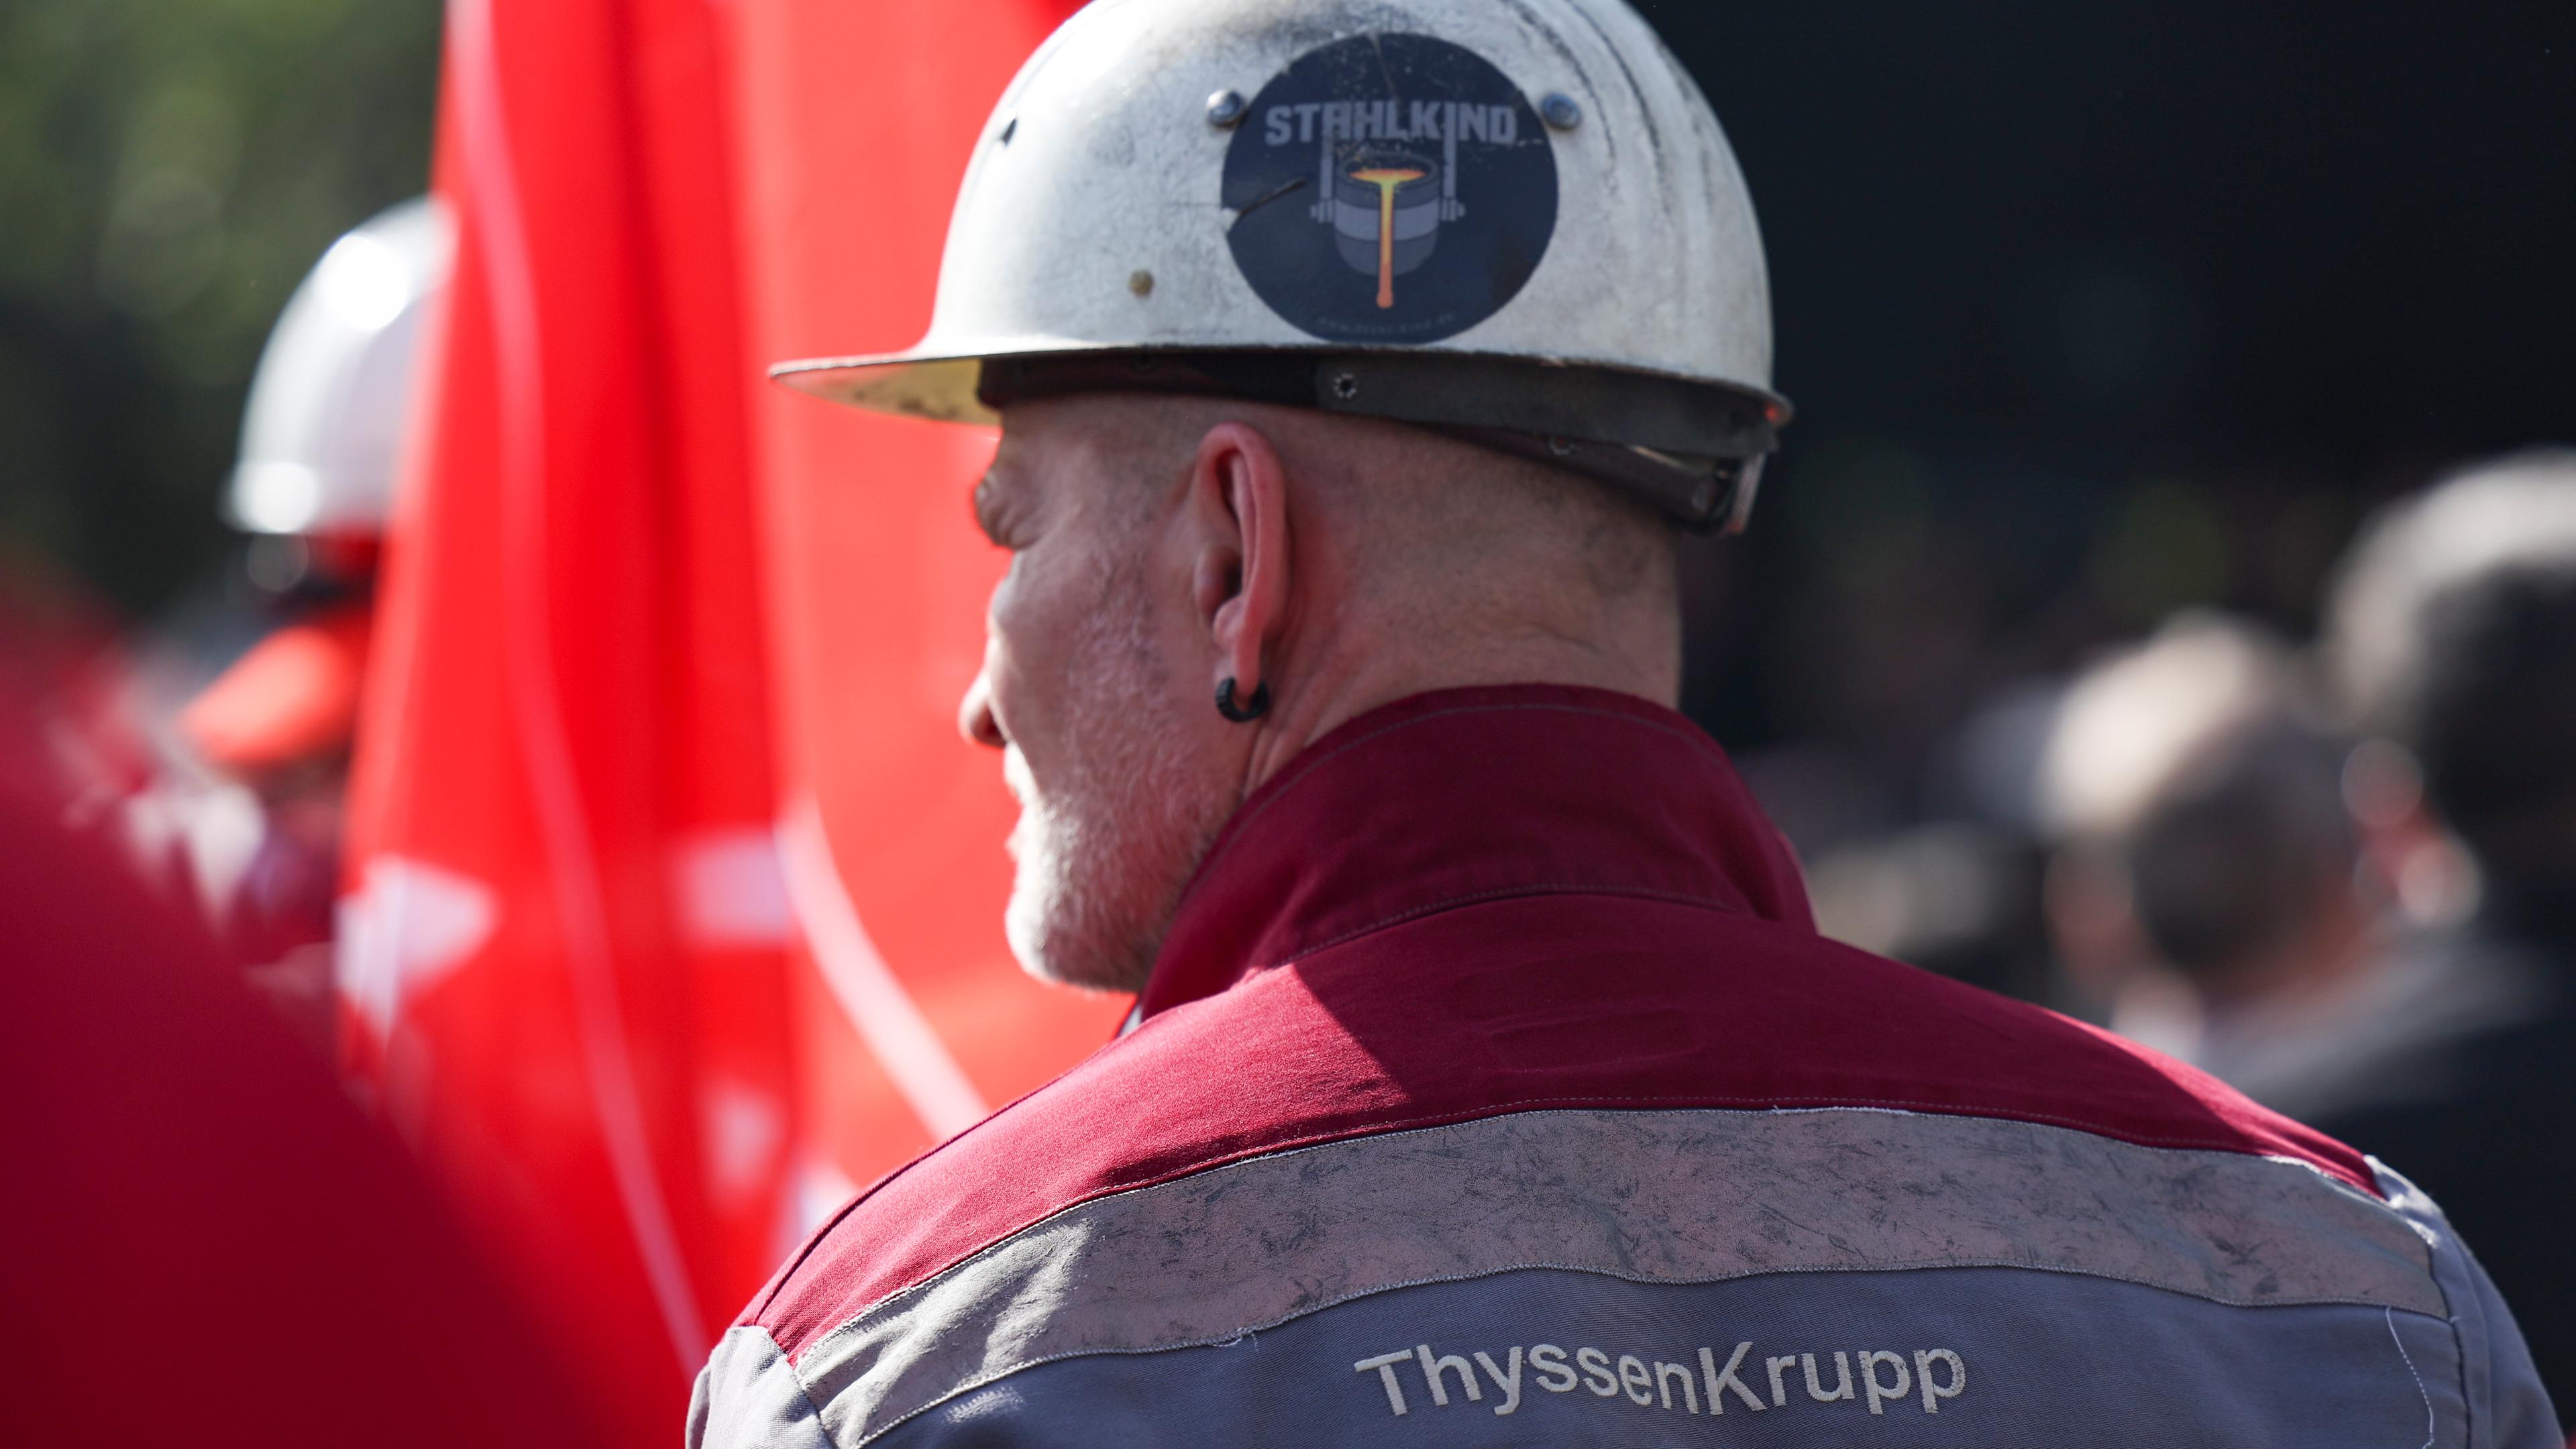 Workers of the steel division of Thyssen-Krupp protest in front of the Thyssen Krupp Steel headquarter in Duisburg, Germany, 30 April 2024. 